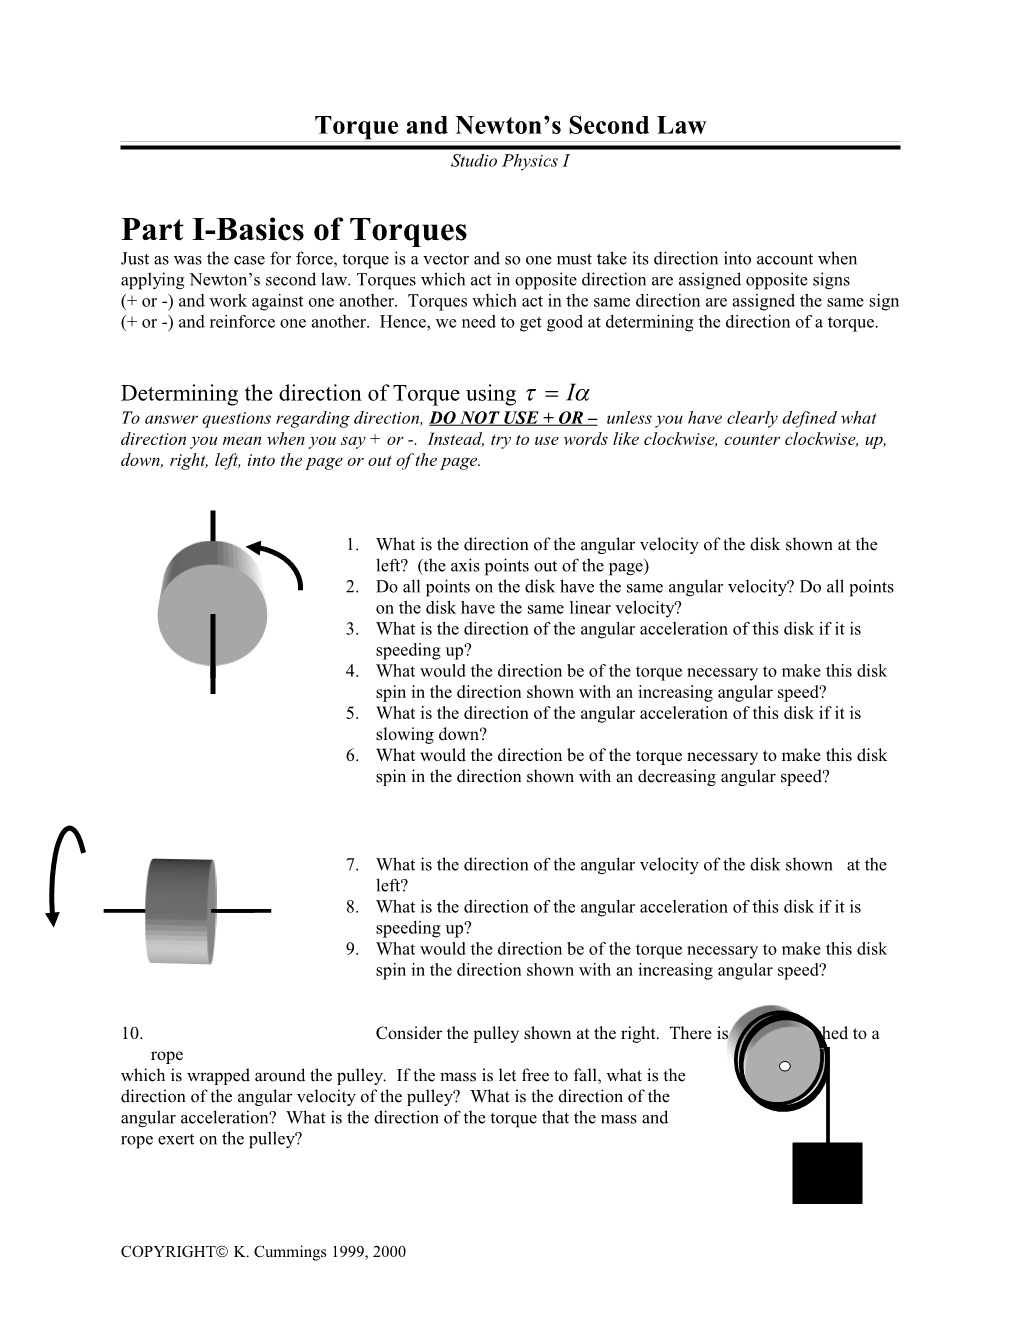 Calculating Rotational Inertias for Simple Objects